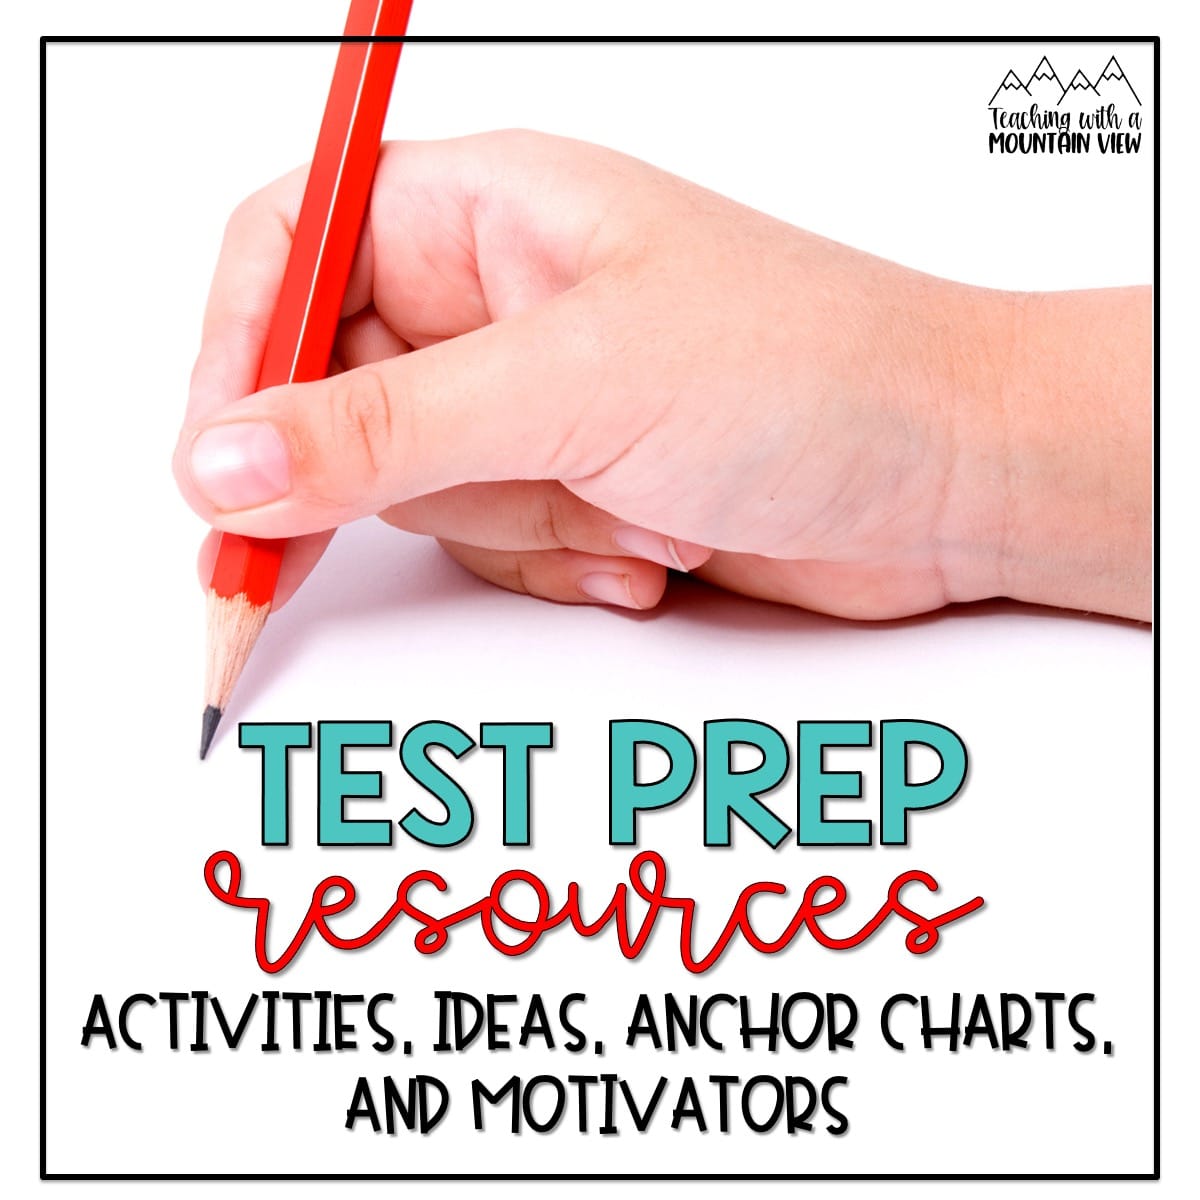 Upper elementary test prep resources, ideas, activities, anchor charts, and motivators to make test prep engaging.